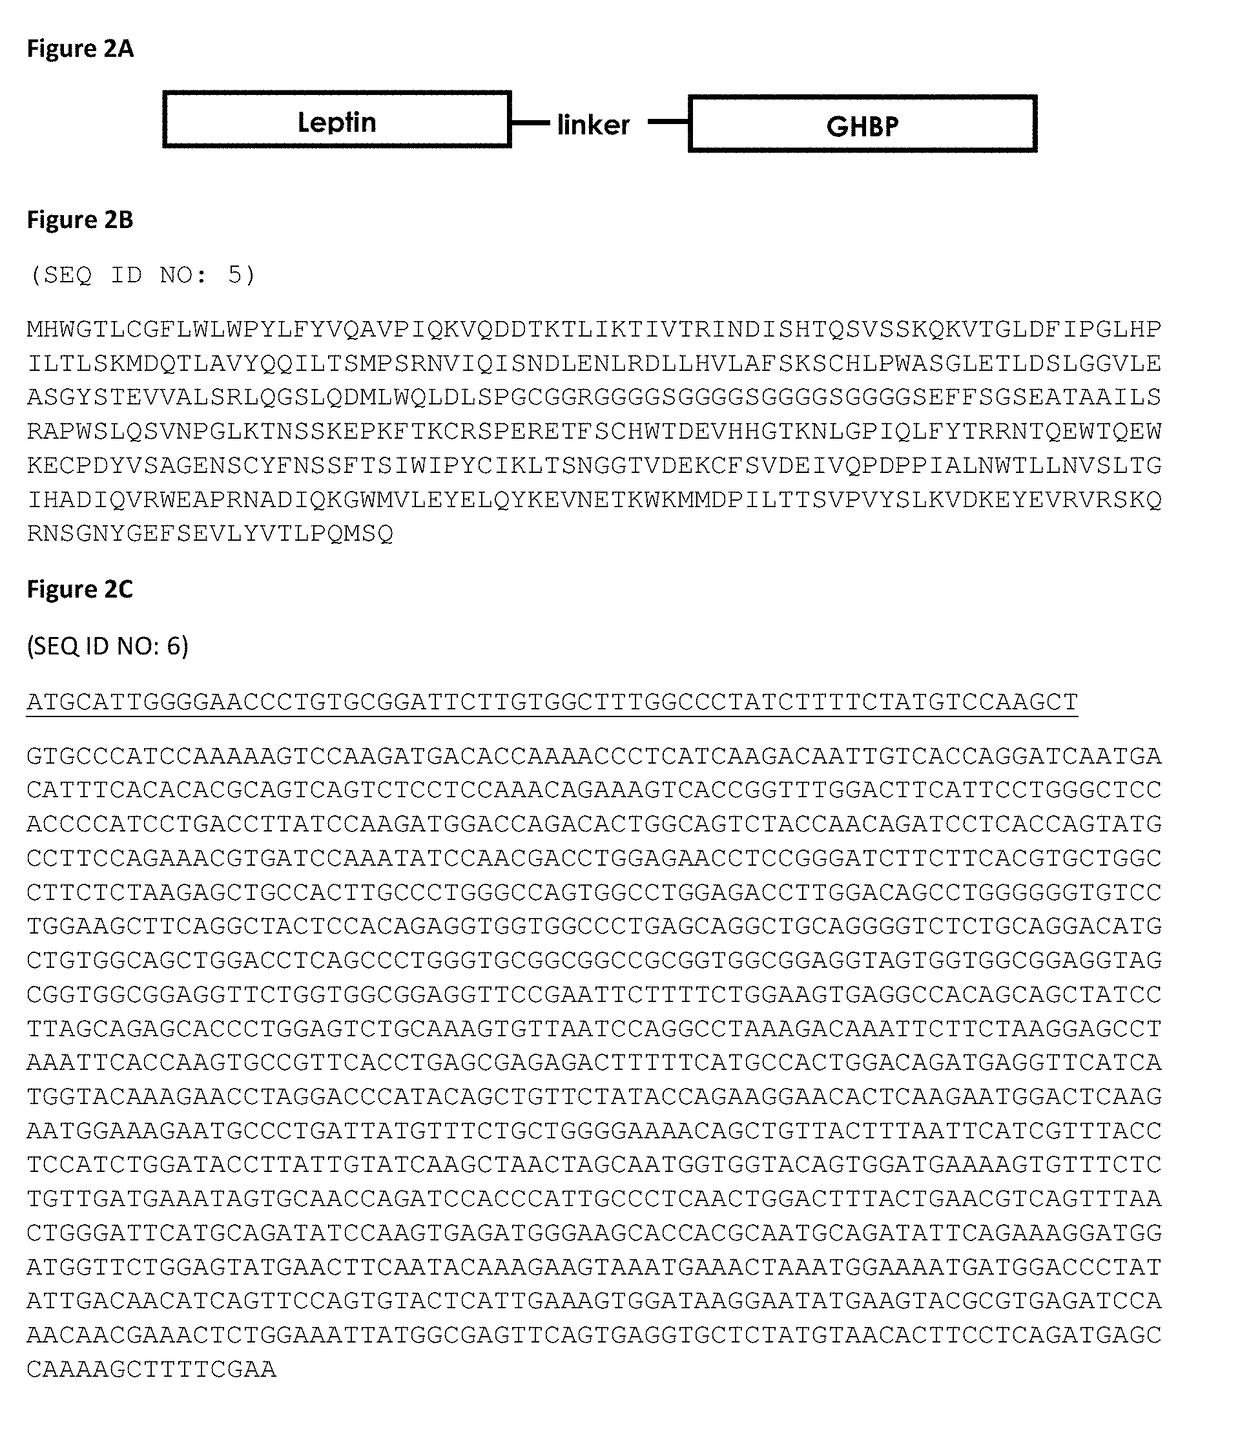 Fusion polypeptide comprising the extracellular binding domain of growth hormone receptor